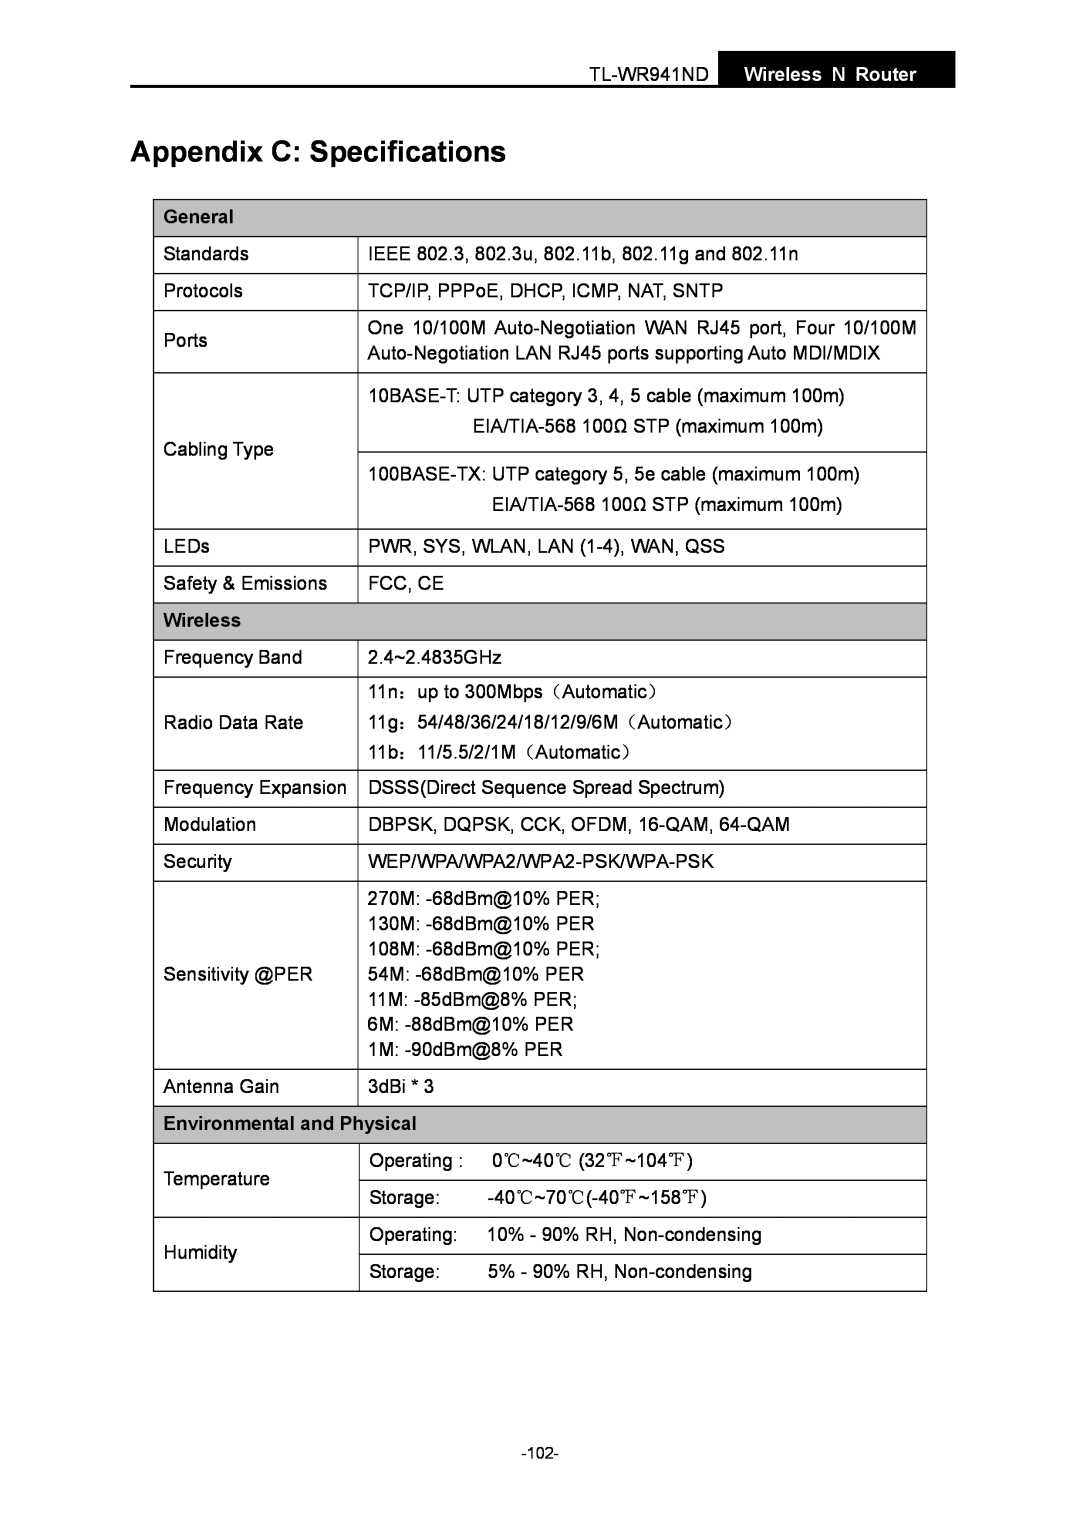 TP-Link manual Appendix C Specifications, General, Environmental and Physical, TL-WR941ND Wireless N Router 